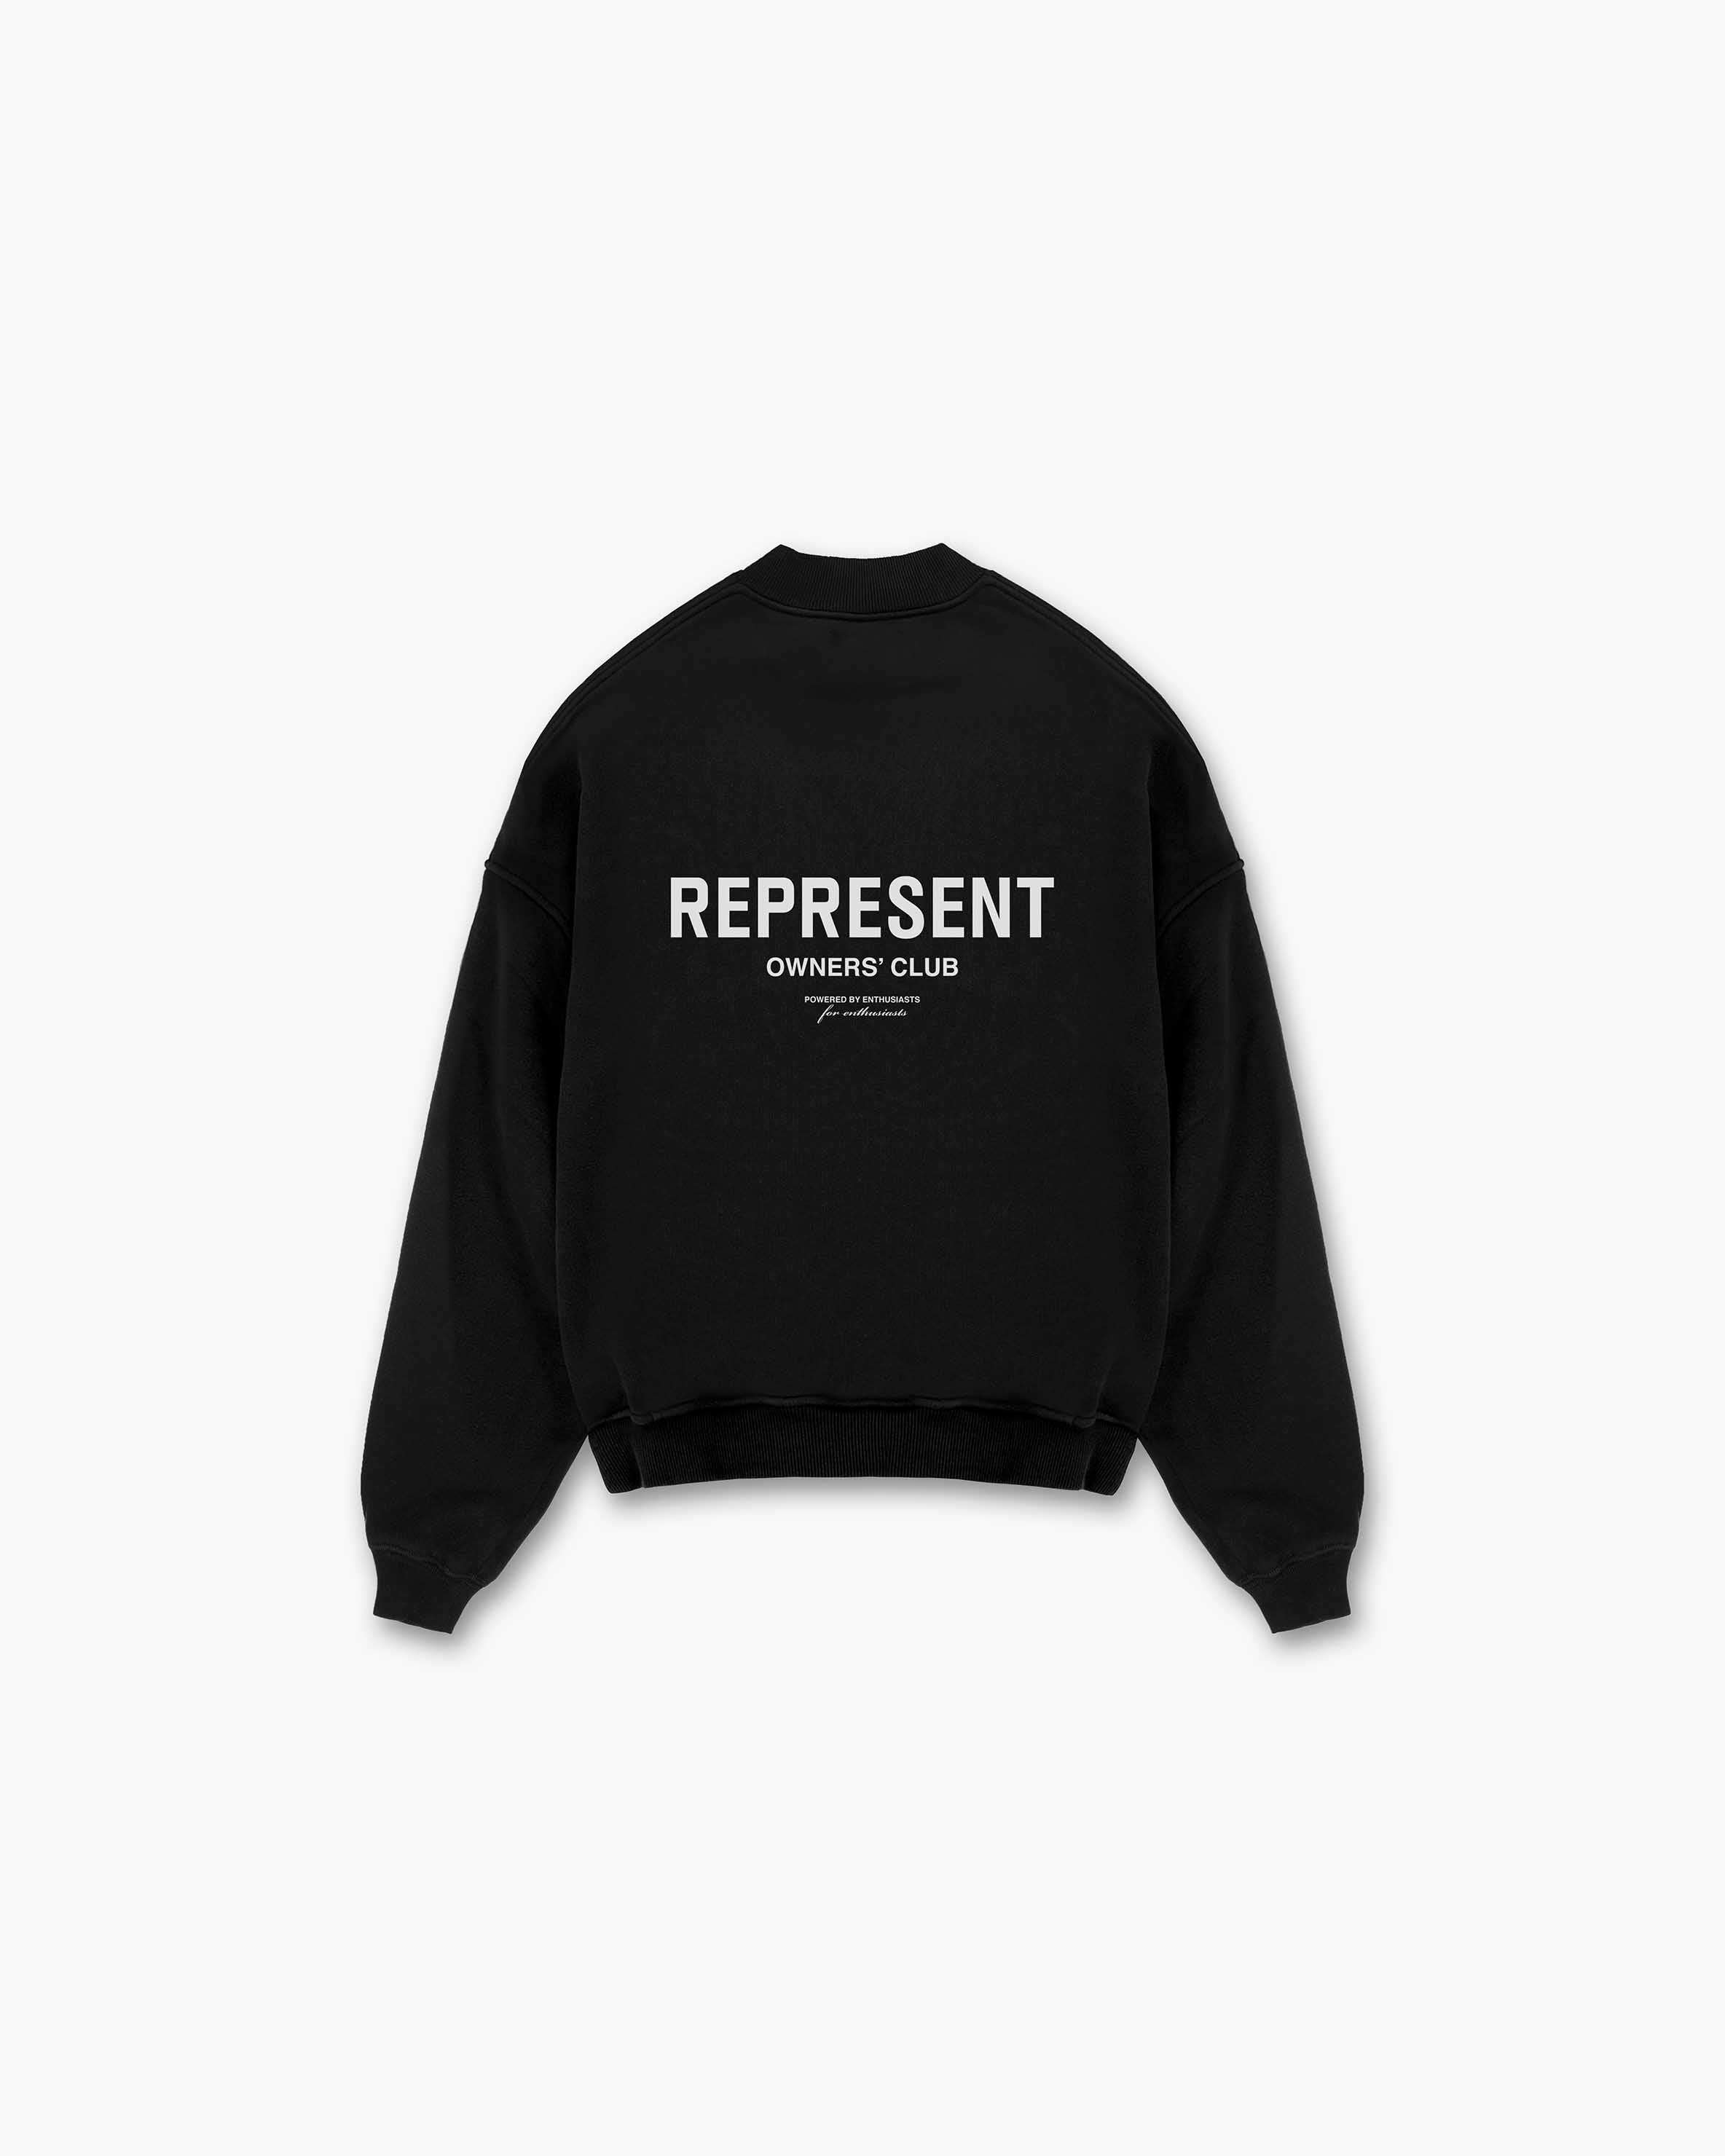 Represent Owners Club Sweater | Black Sweaters Owners Club | Represent Clo